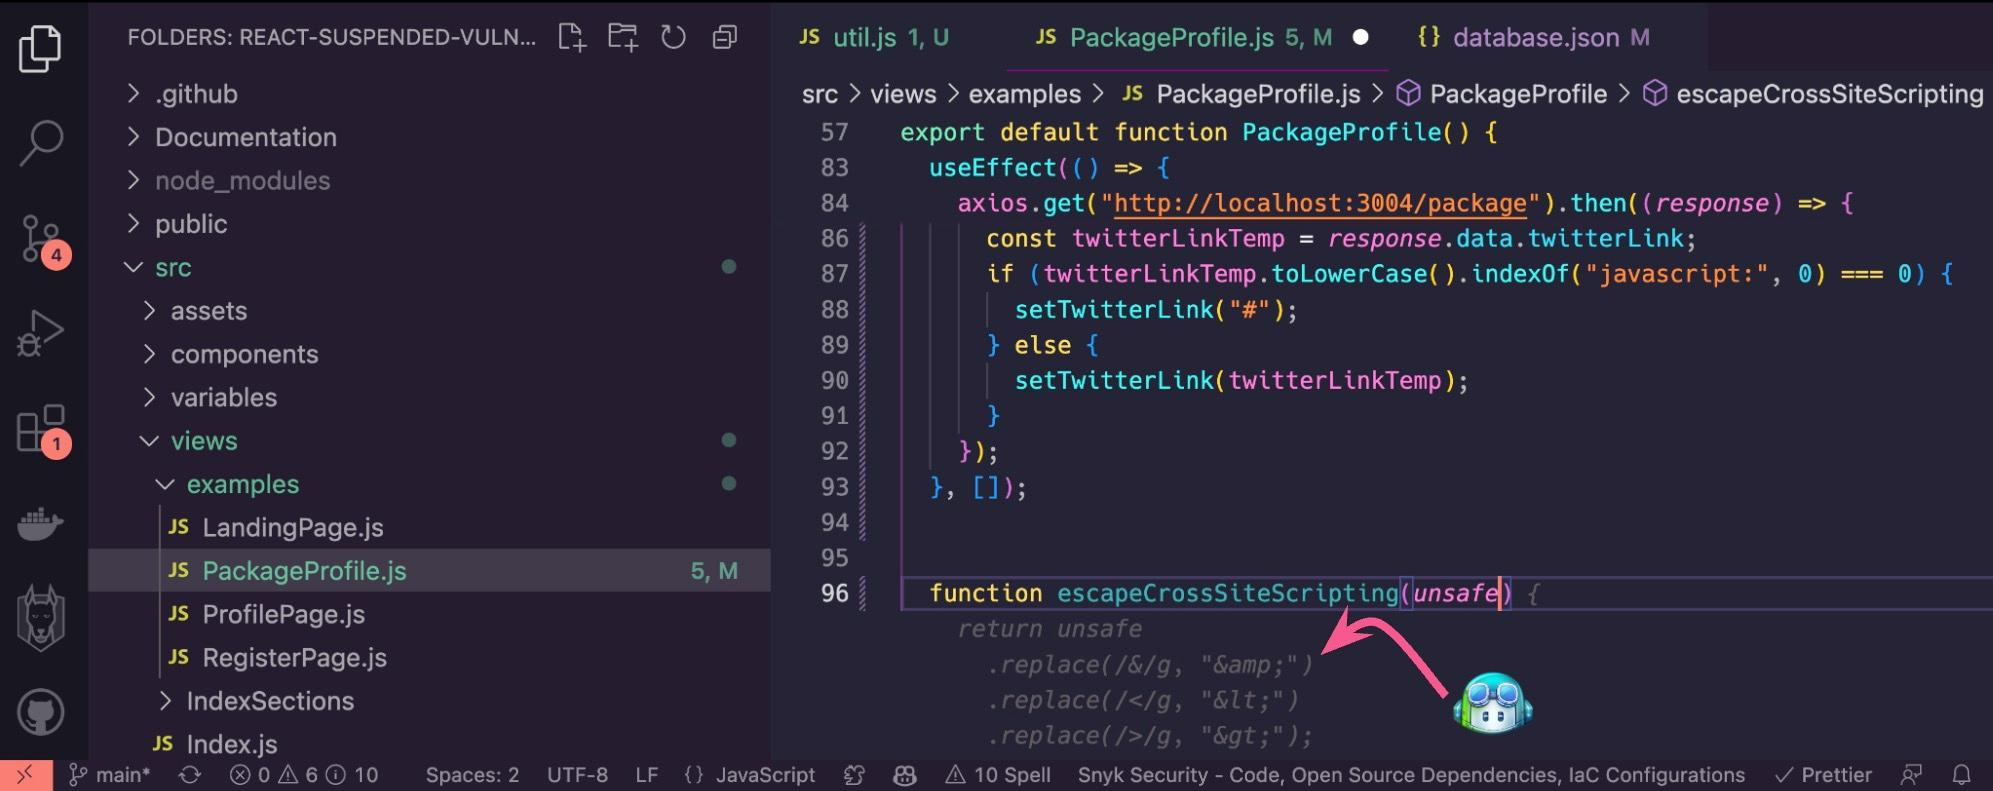 VS Code IDE showing how GitHub Copilot autosuggests code that escapes Cross-site Scripting but is it really a secure code?